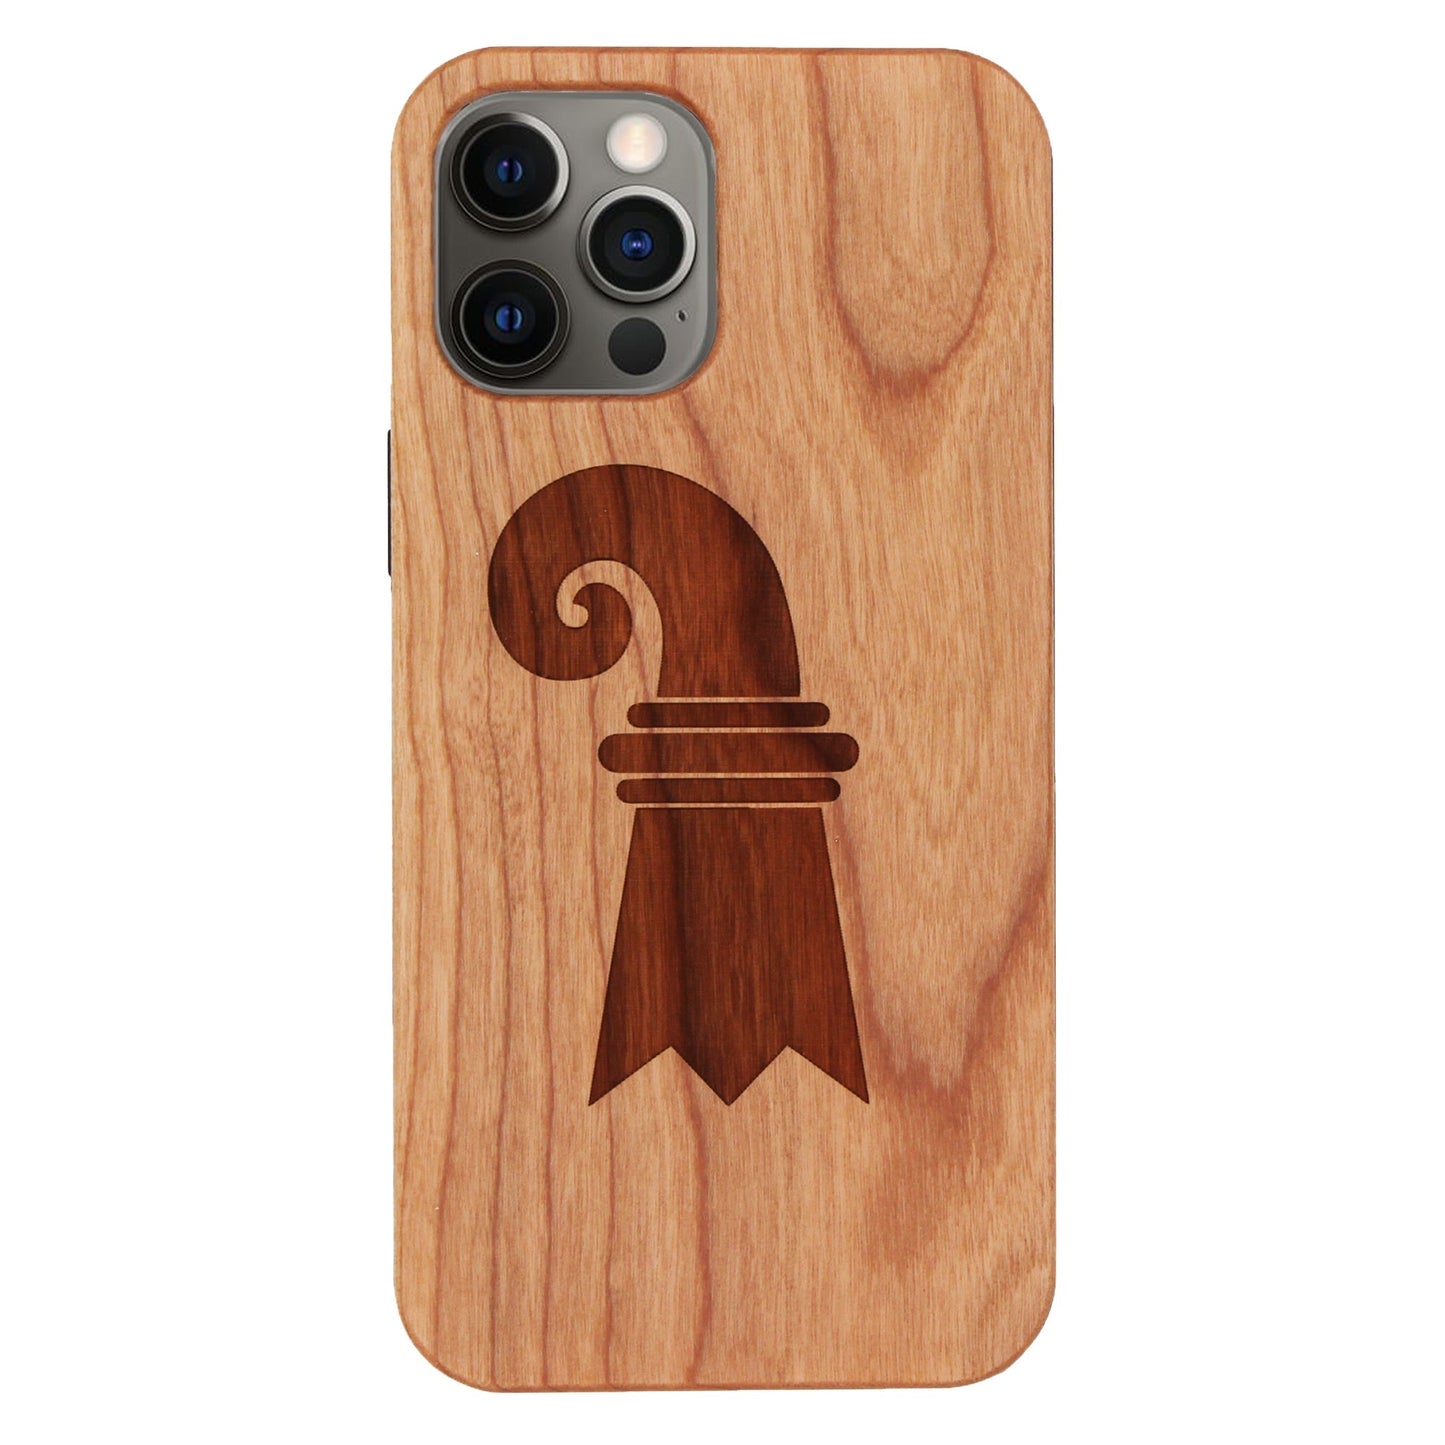 Baslerstab Eden case made of cherry wood for iPhone 12 Pro Max 